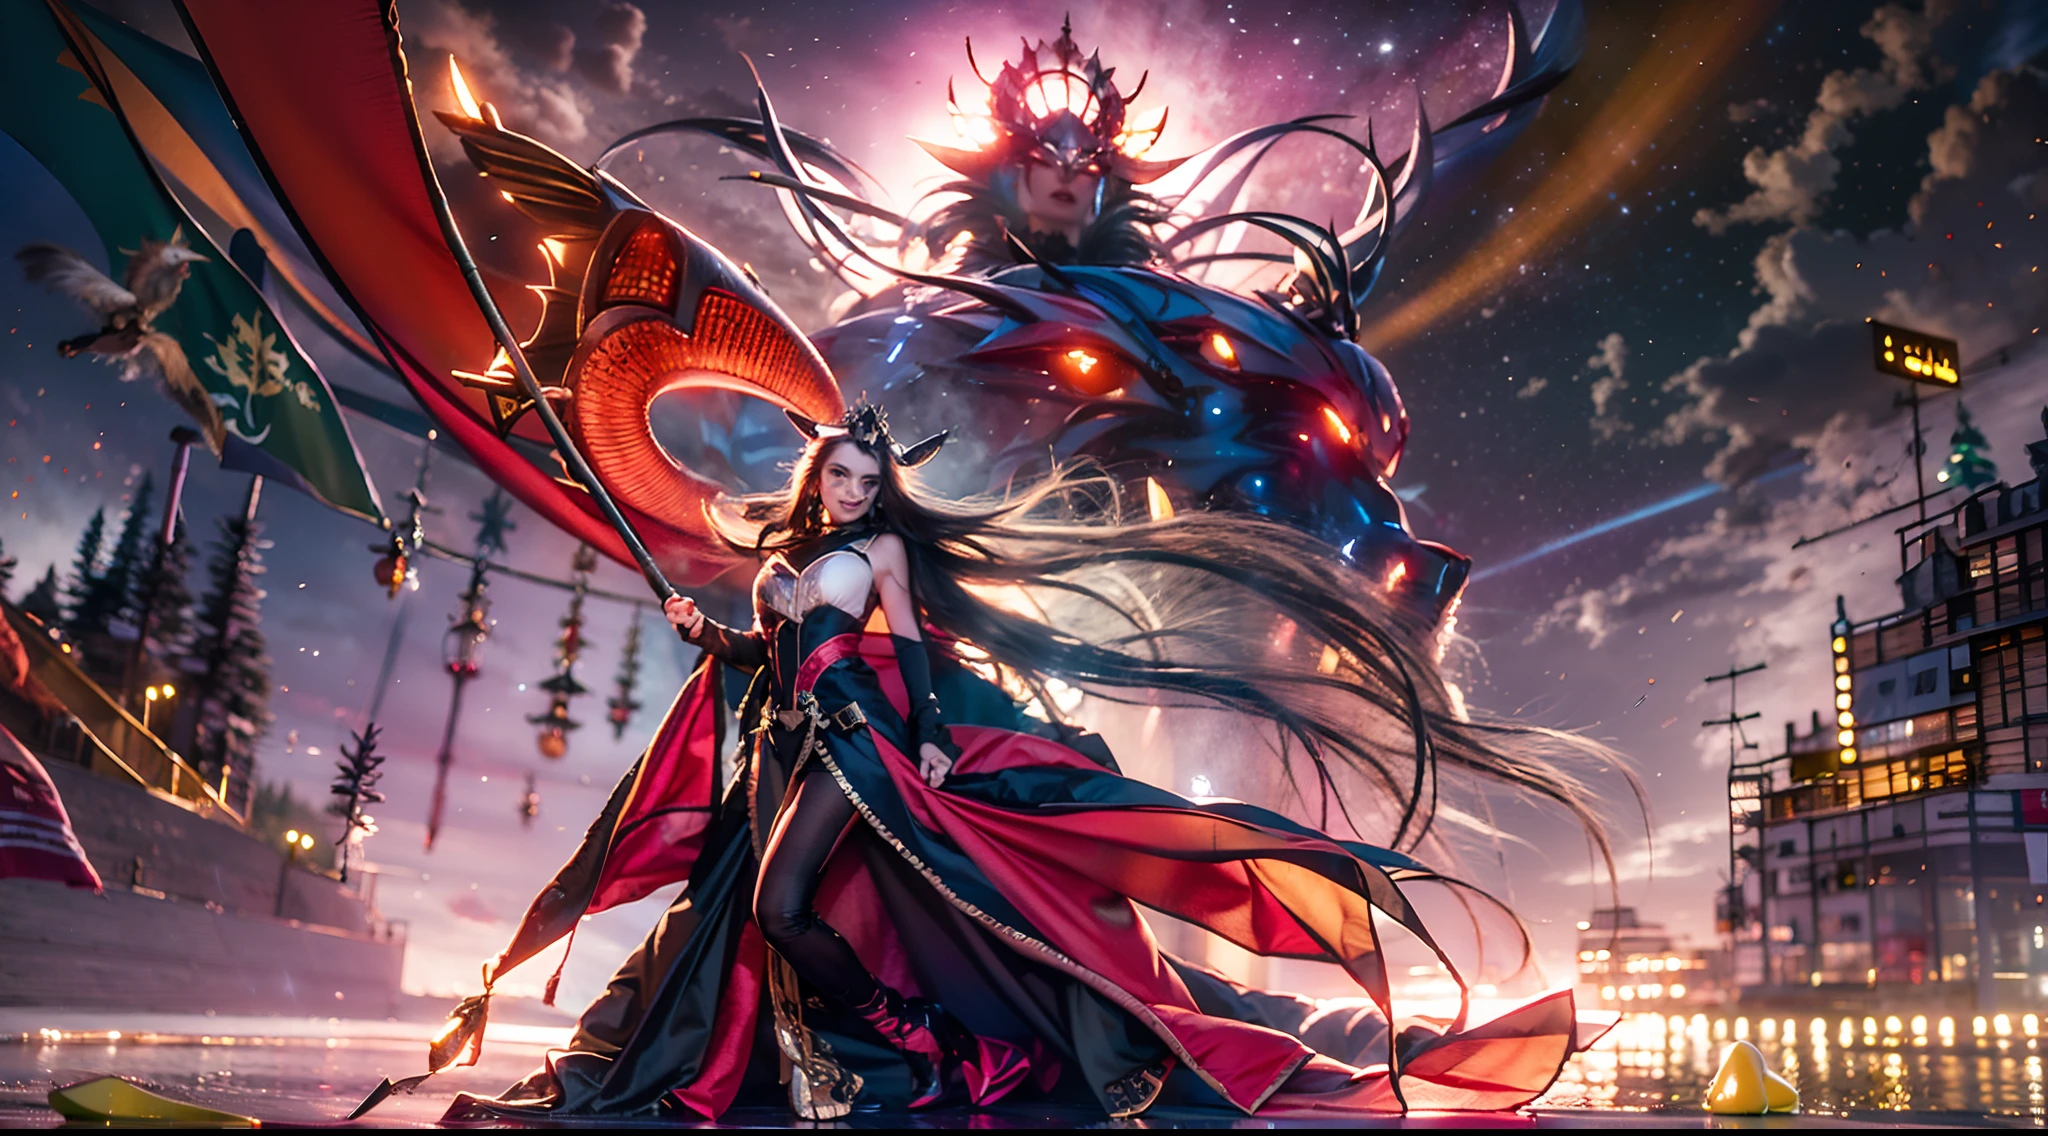 In this super grand scene，The wide-angle lens captures a striking picture。Heaven and earth collapsed，The corpse mountains of the Heavenly Immortal Buddha spread out in a sea of blood，The Avenue of the Three Realms was broken，And in the boundless chaotic darkness，Two figures stand in it。Above all，The figure of the weaver girl is graceful，While standing in this darkness，Like a blazing flame in the night，Like the goddess of darkness in a fairyland，Her presence exudes a majestic and majestic evil aura。She holds the Pauline lamp in her left hand，A gentle light illuminates the cowherd，The right hand holds the heaven-opening axe，The lines on the blade of the axe reveal ancient authority。There was fanaticism and determination in her eyes，As if a warrior in the dark，Do whatever it takes for some kind of goal。Her gaze reveals firmness and depth，As if it were an existence with endless wisdom。And beside her，Niu Lang is dressed in a black robe，Mounted on a scalper reincarnated by the Bull Demon King。This scalper is huge，Carrying heavy history and strength。Its horns shone with a grim glow，It symbolizes an unshakable and firm will。The cowherd sits on the back of the scalper，His gaze is deep and powerful，As if it can penetrate the darkness，Find the light of hope。His battle robe fluttered in the wind，Reveals his bravery and determination。In front of it all，A thousand-square-foot high Magpie Bridge spans the void，Connecting darkness and light。The Magpie Bridge emits a starry river，Like the last light between heaven and earth，A glimmer of hope for a world shrouded in destruction and darkness。The cowherd and the blackened seven fairies looked at each other and laughed，The eyes are full of tacit understanding and emotion，They seem destined to face this crisis together。The composition of the whole picture cleverly shows that the Magpie Bridge is erected above the corpse mountain and the sea of blood，With fairy corpses、The sea of golden blood is intertwined，The result is a grand visual ef